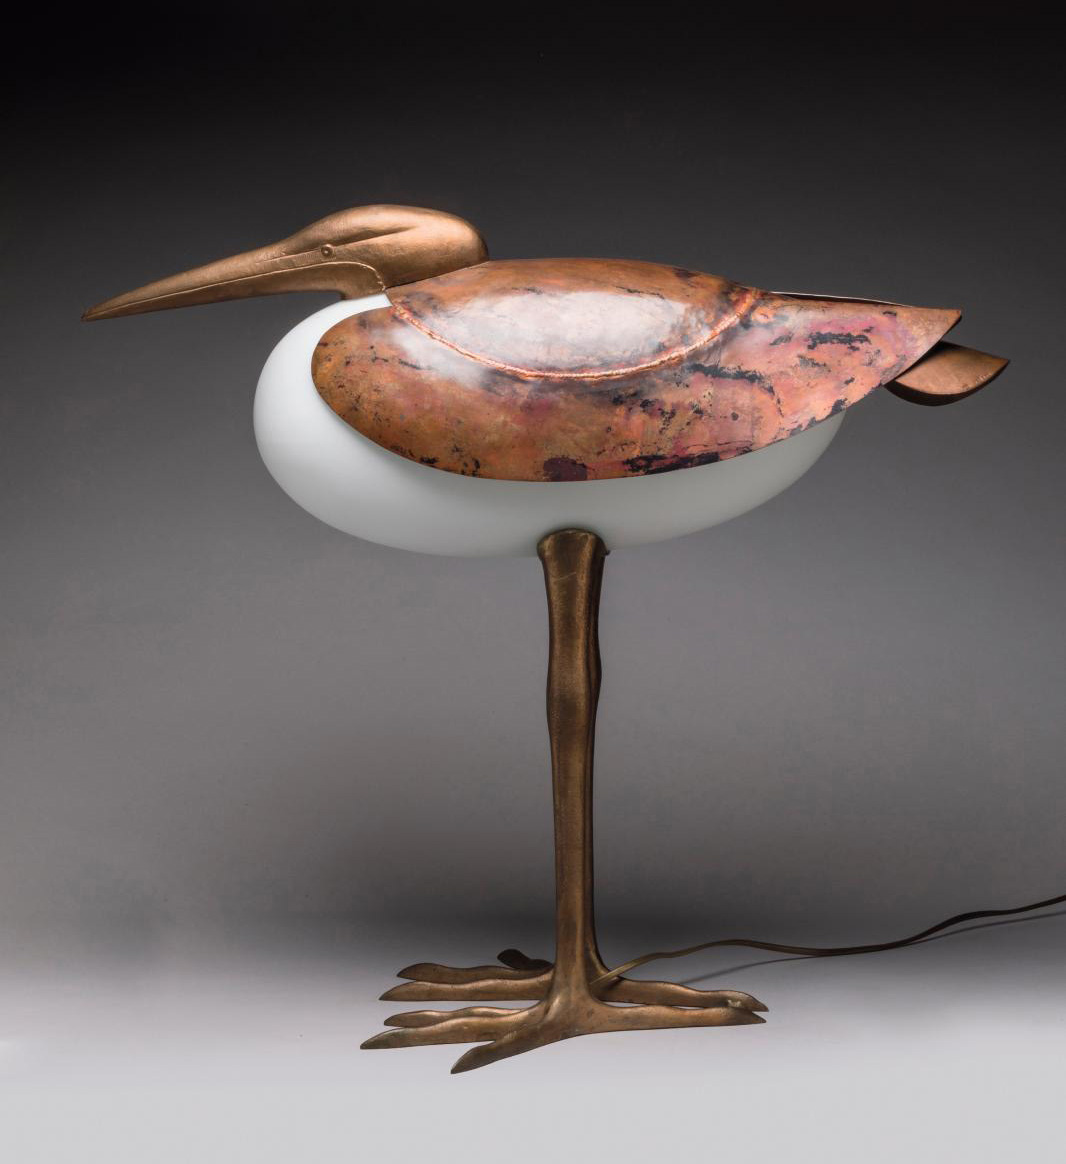 François-Xavier Lalanne (1927-2008), Grand Échassier lamp-sculpture (Tall Wading Bird), c. 1990, copper with red patina, gilded bronze and